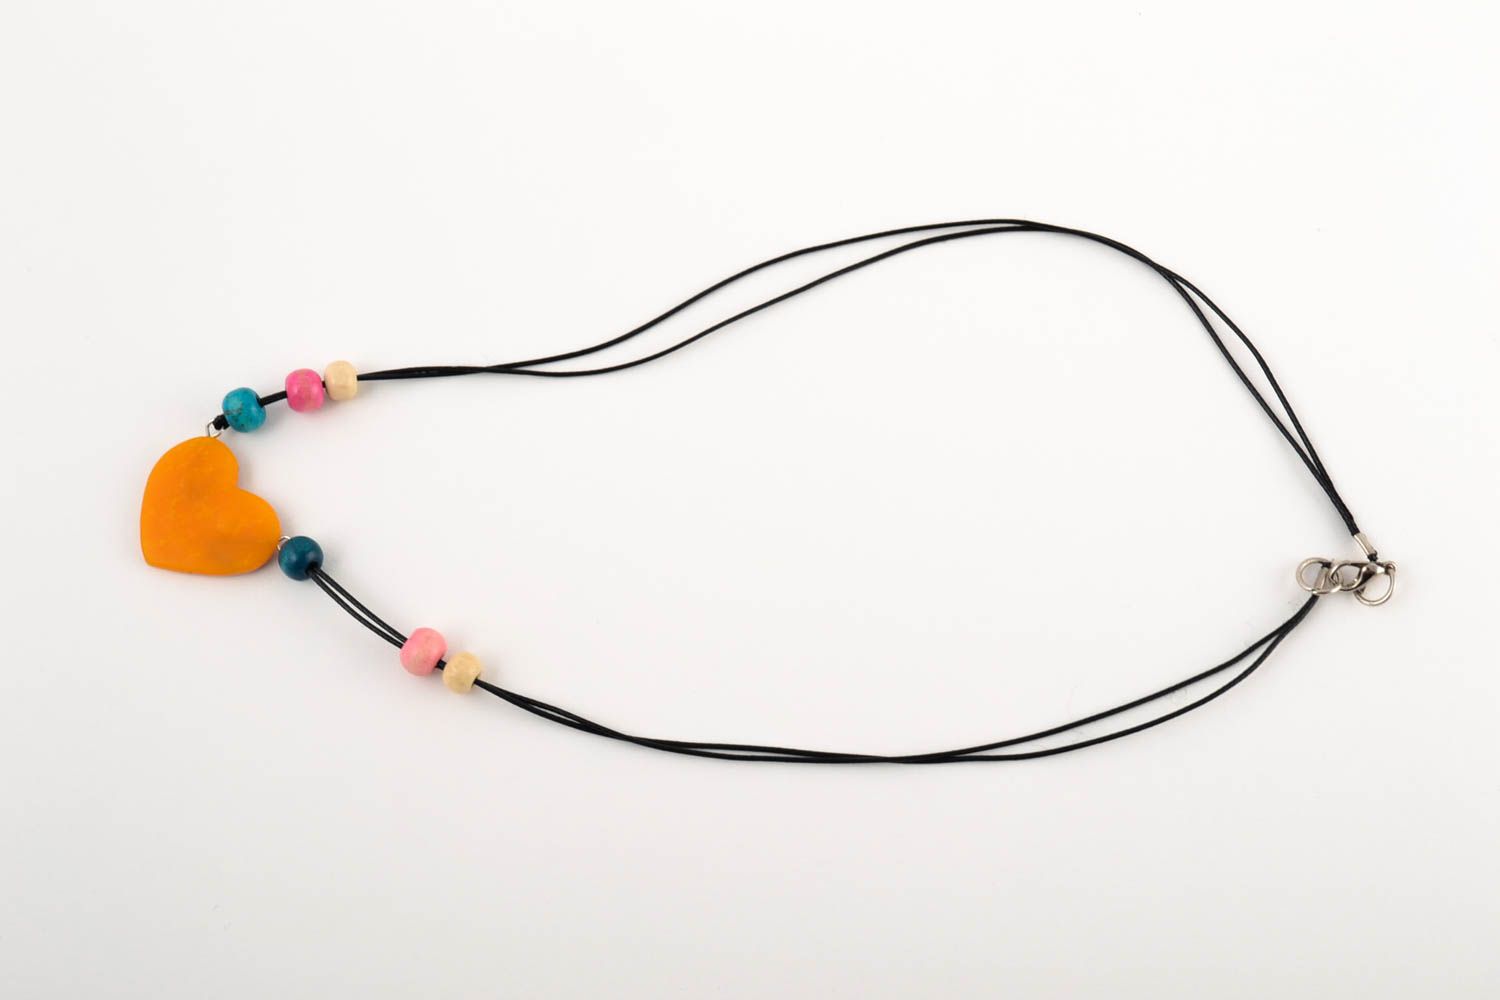 Handmade plastic pendant on cord fashion trends for girls polymer clay ideas photo 3